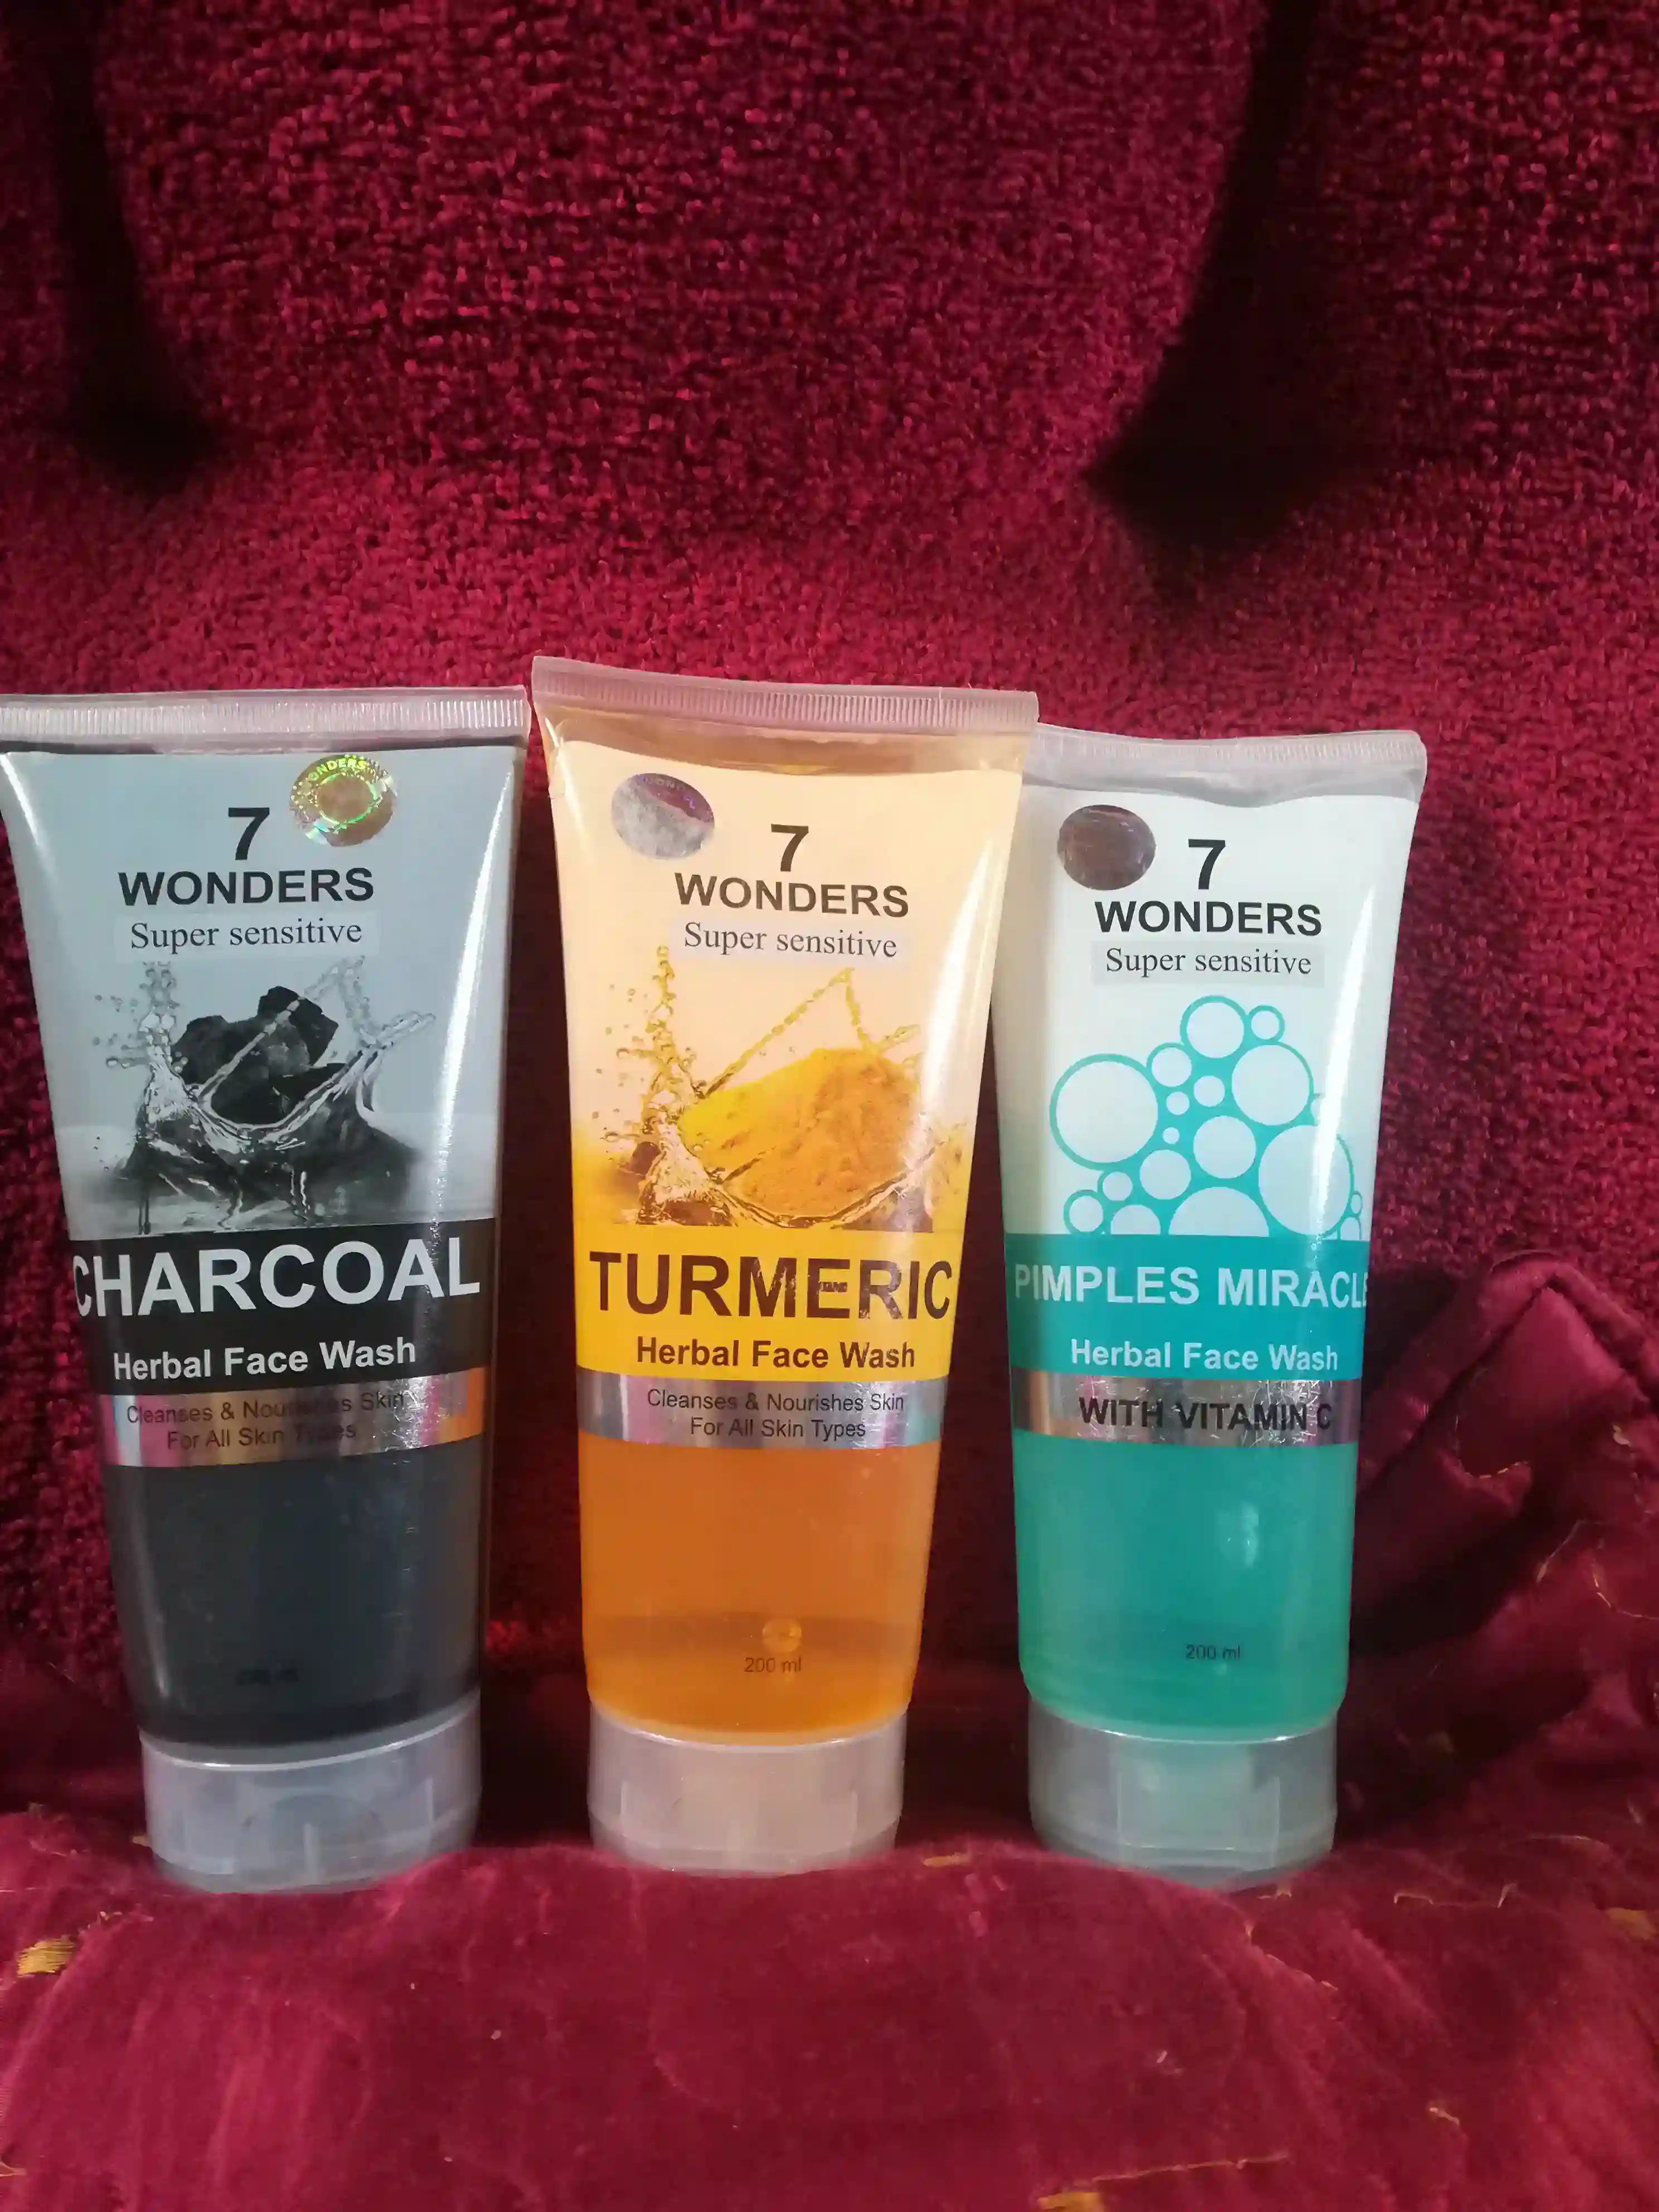 7 Wonders Face Washes (Charcoal, Time rich, Pimples miracle) 